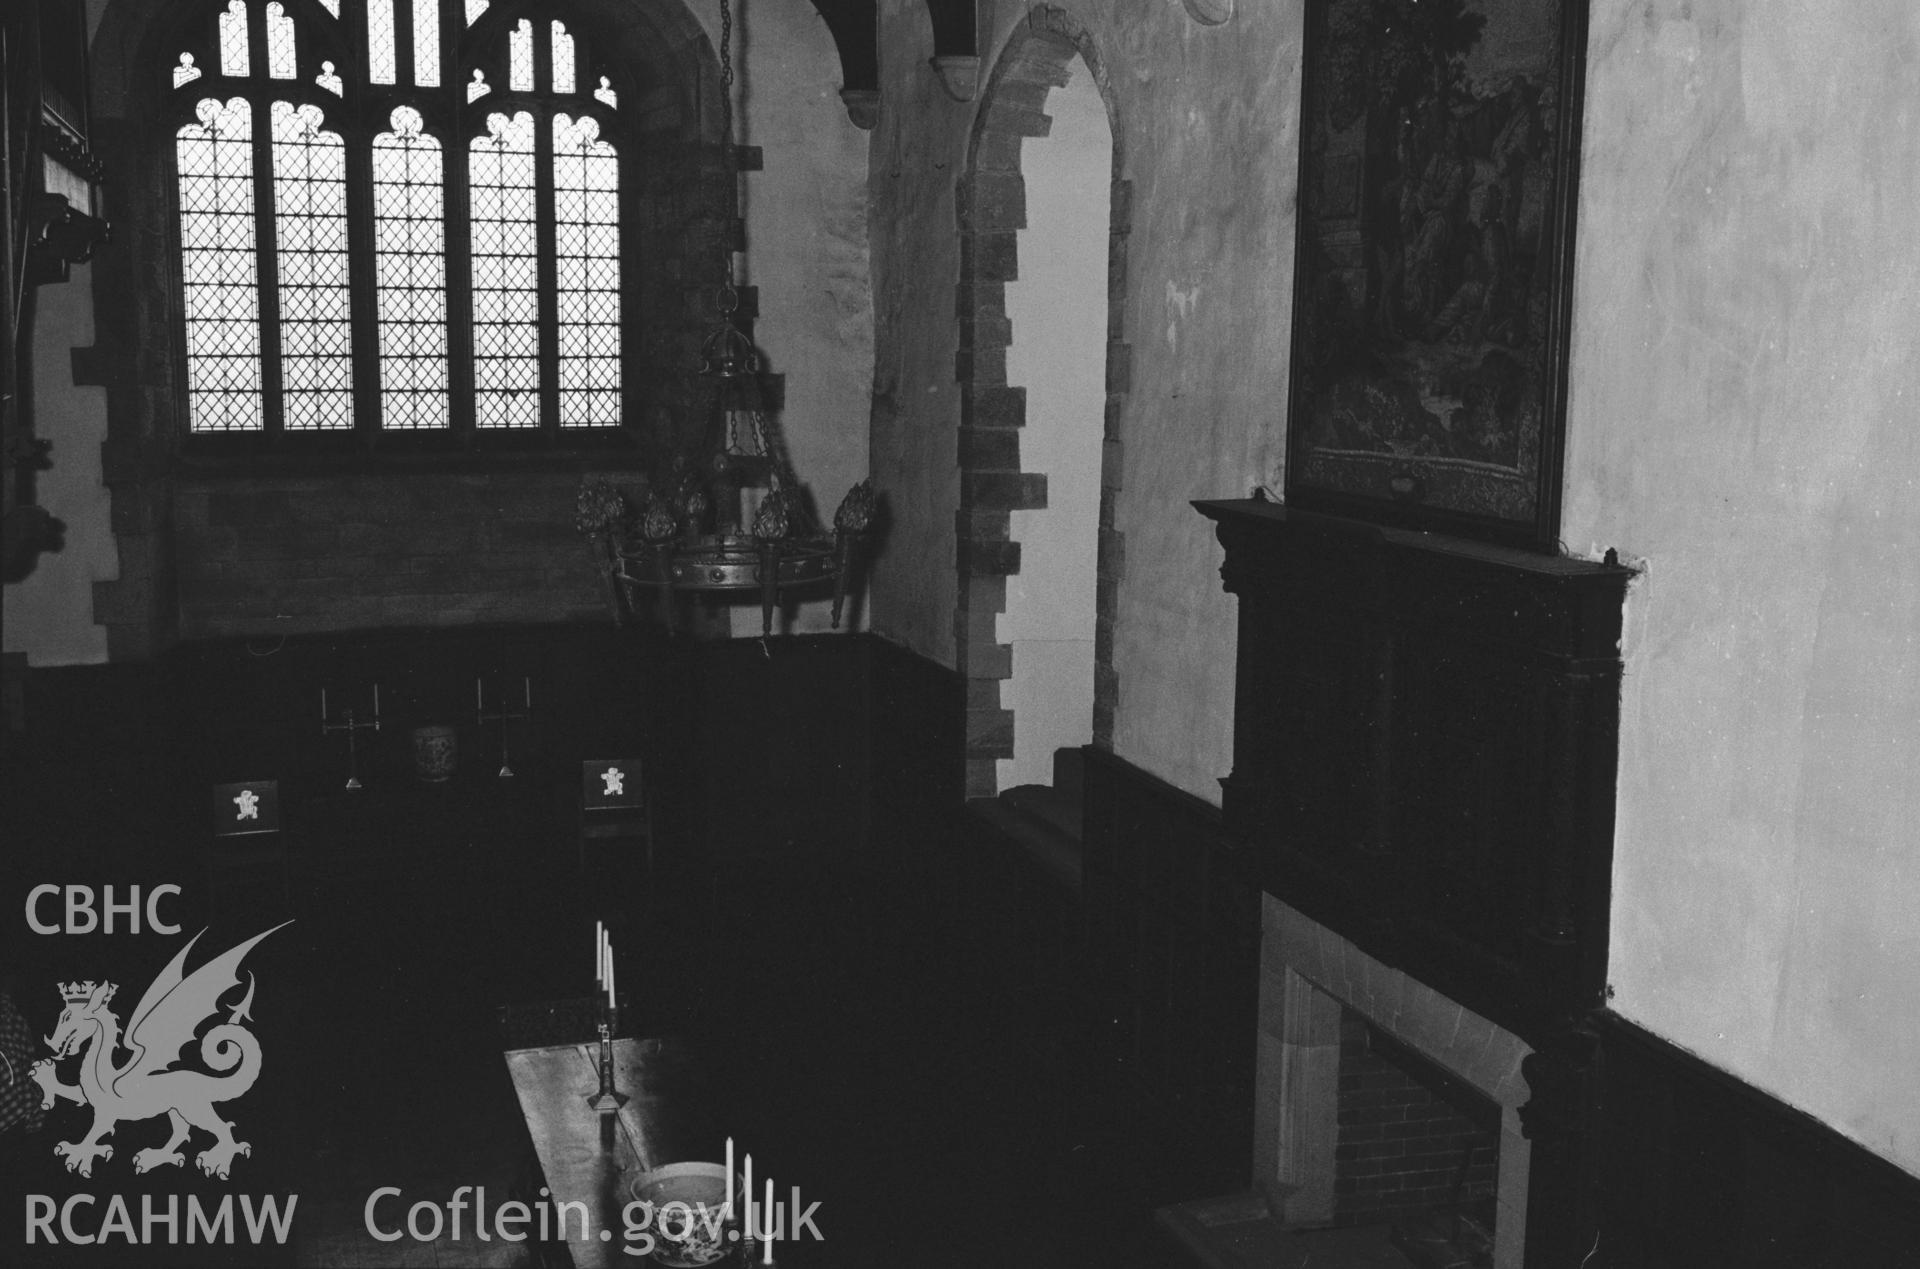 Interior view of Chirk Castle collated by the former Central Office of Information.